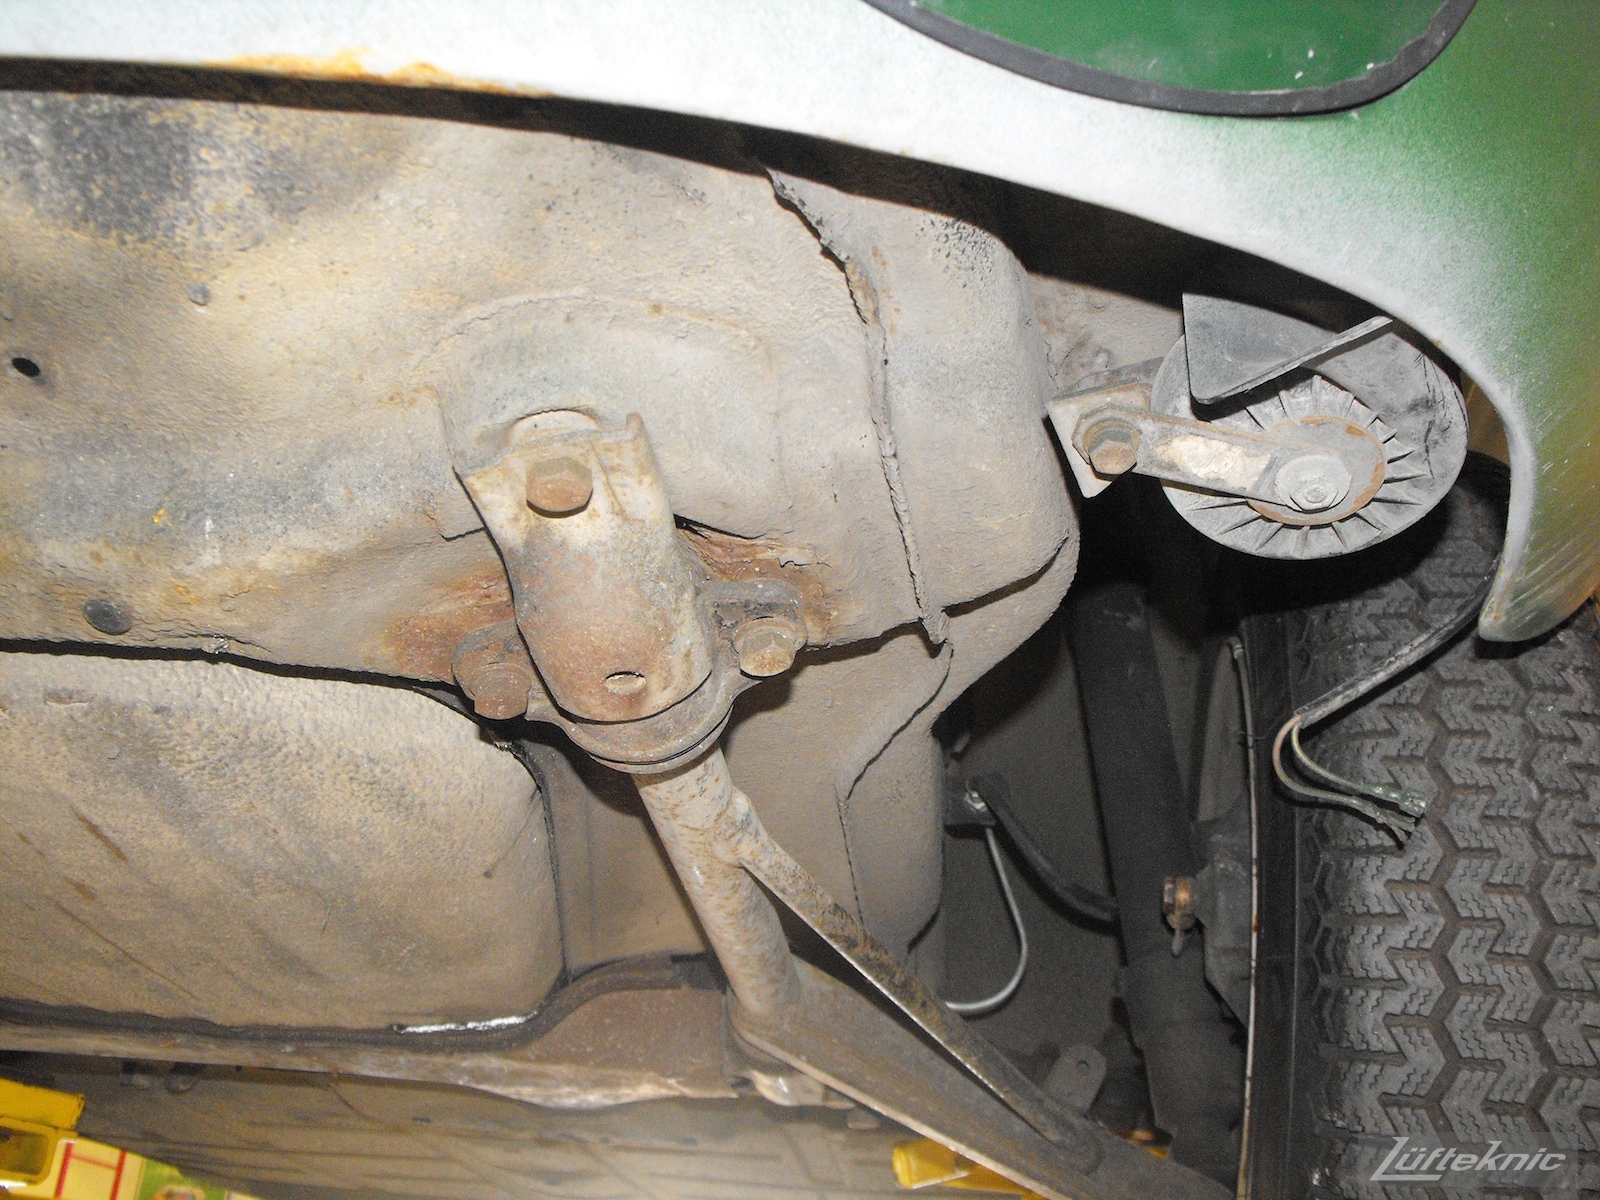 An Irish Green Porsche 912 undergoing restoration at Lufteknic with rust at the front suspension mount on the pan.